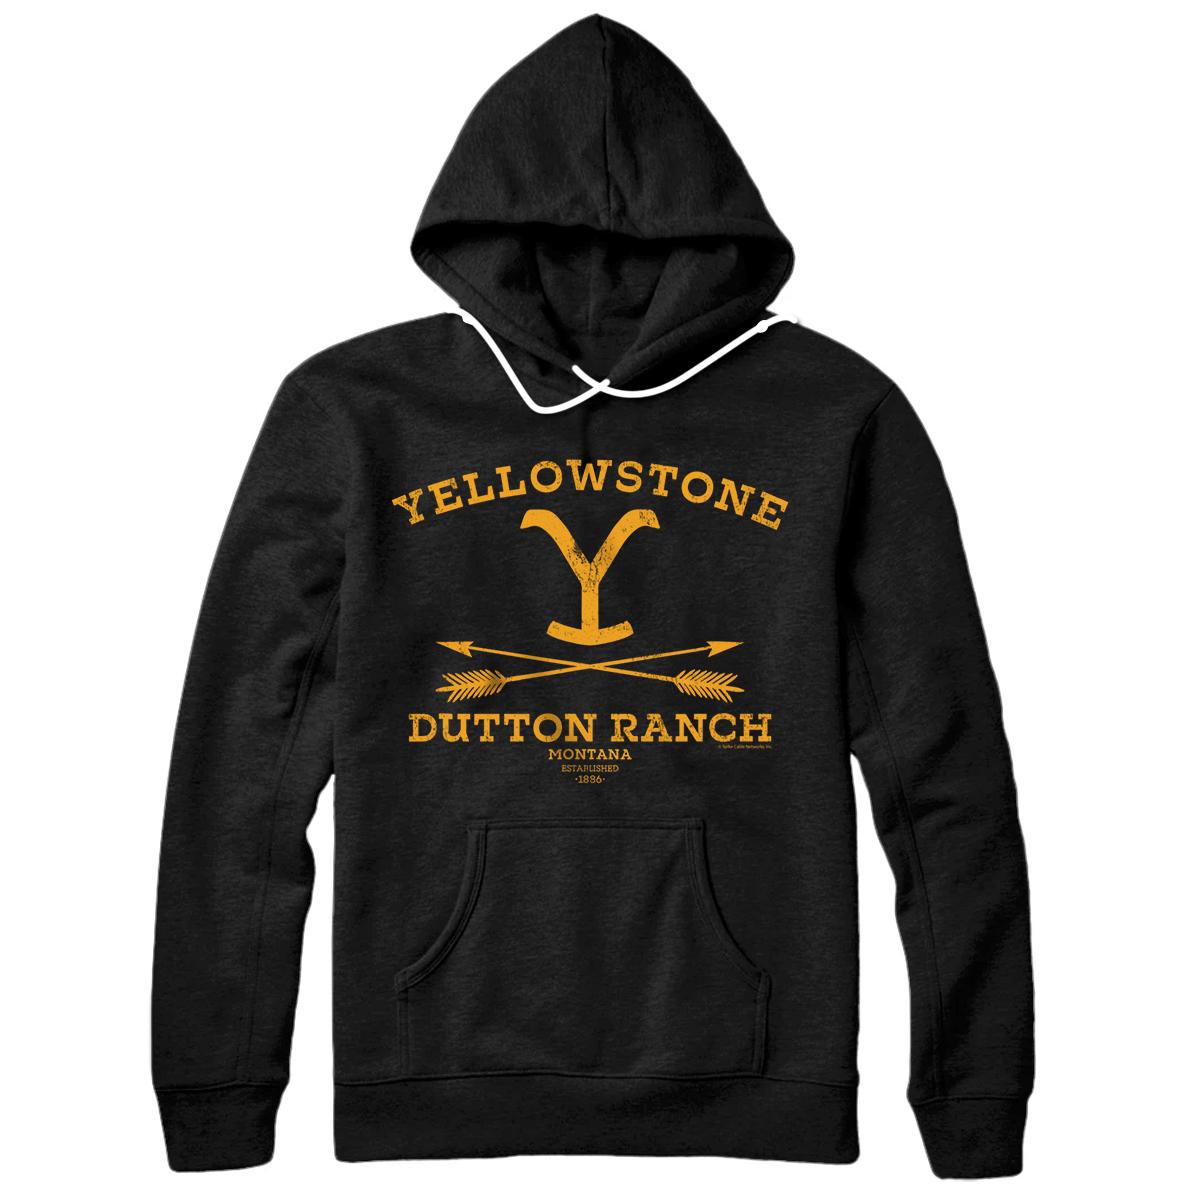 Personalized Yellowstone Dutton Ranch Arrows Pullover Hoodie